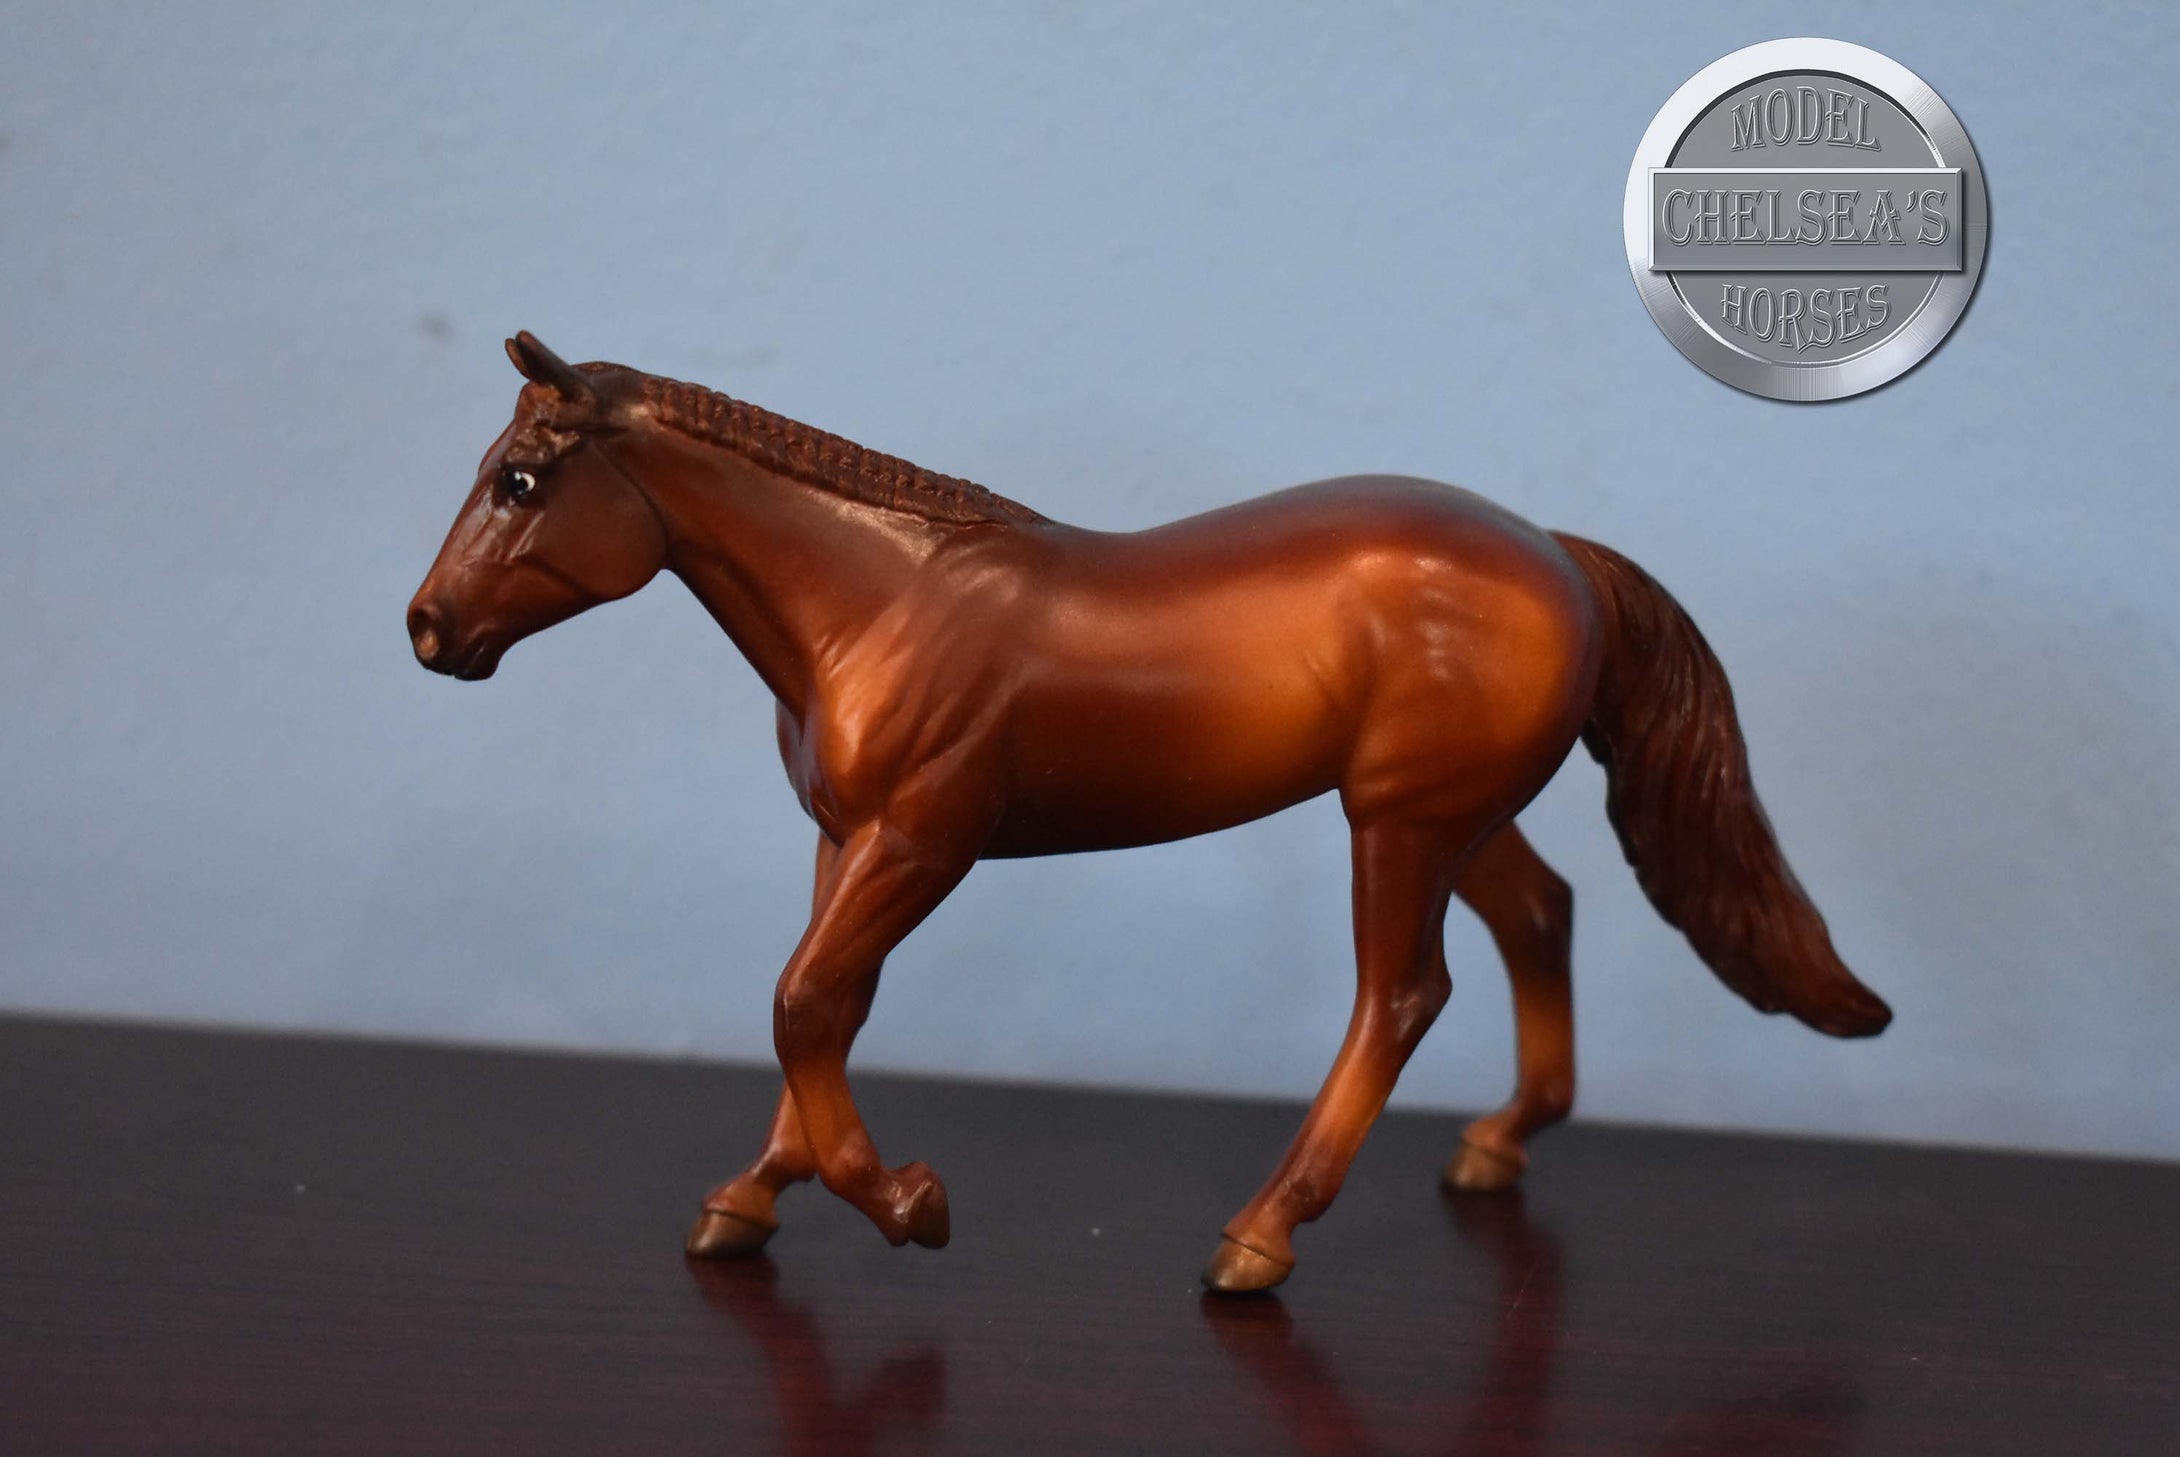 Chestnut Loping Quarter Horse-From Horse Crazy Series 3-Breyer Stablemate